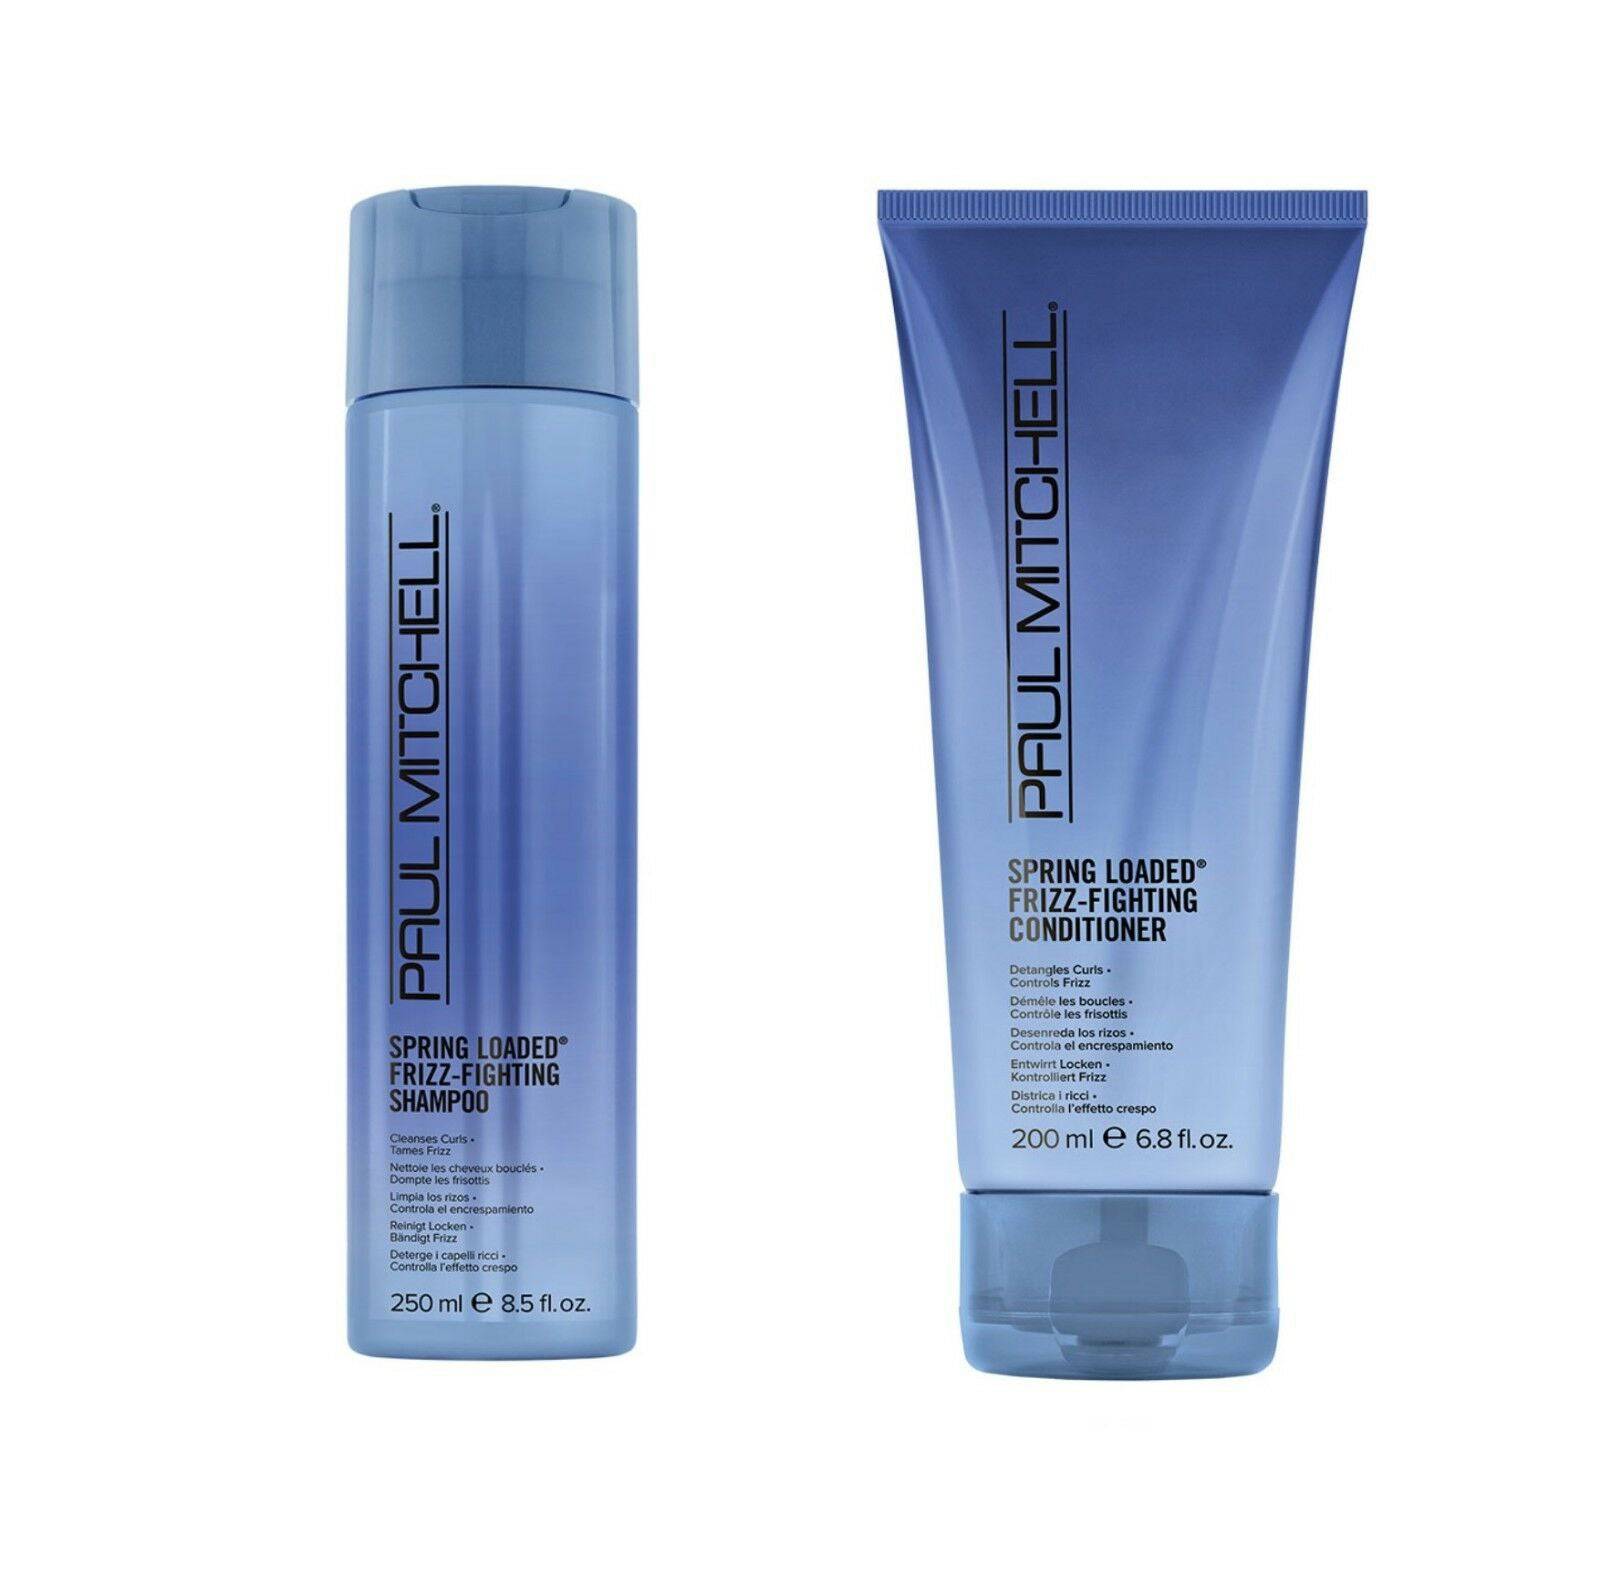 Paul Mitchell Spring Loaded Frizz-Fighting Tames Frizz Shampoo and Conditioner Duo - On Line Hair Depot